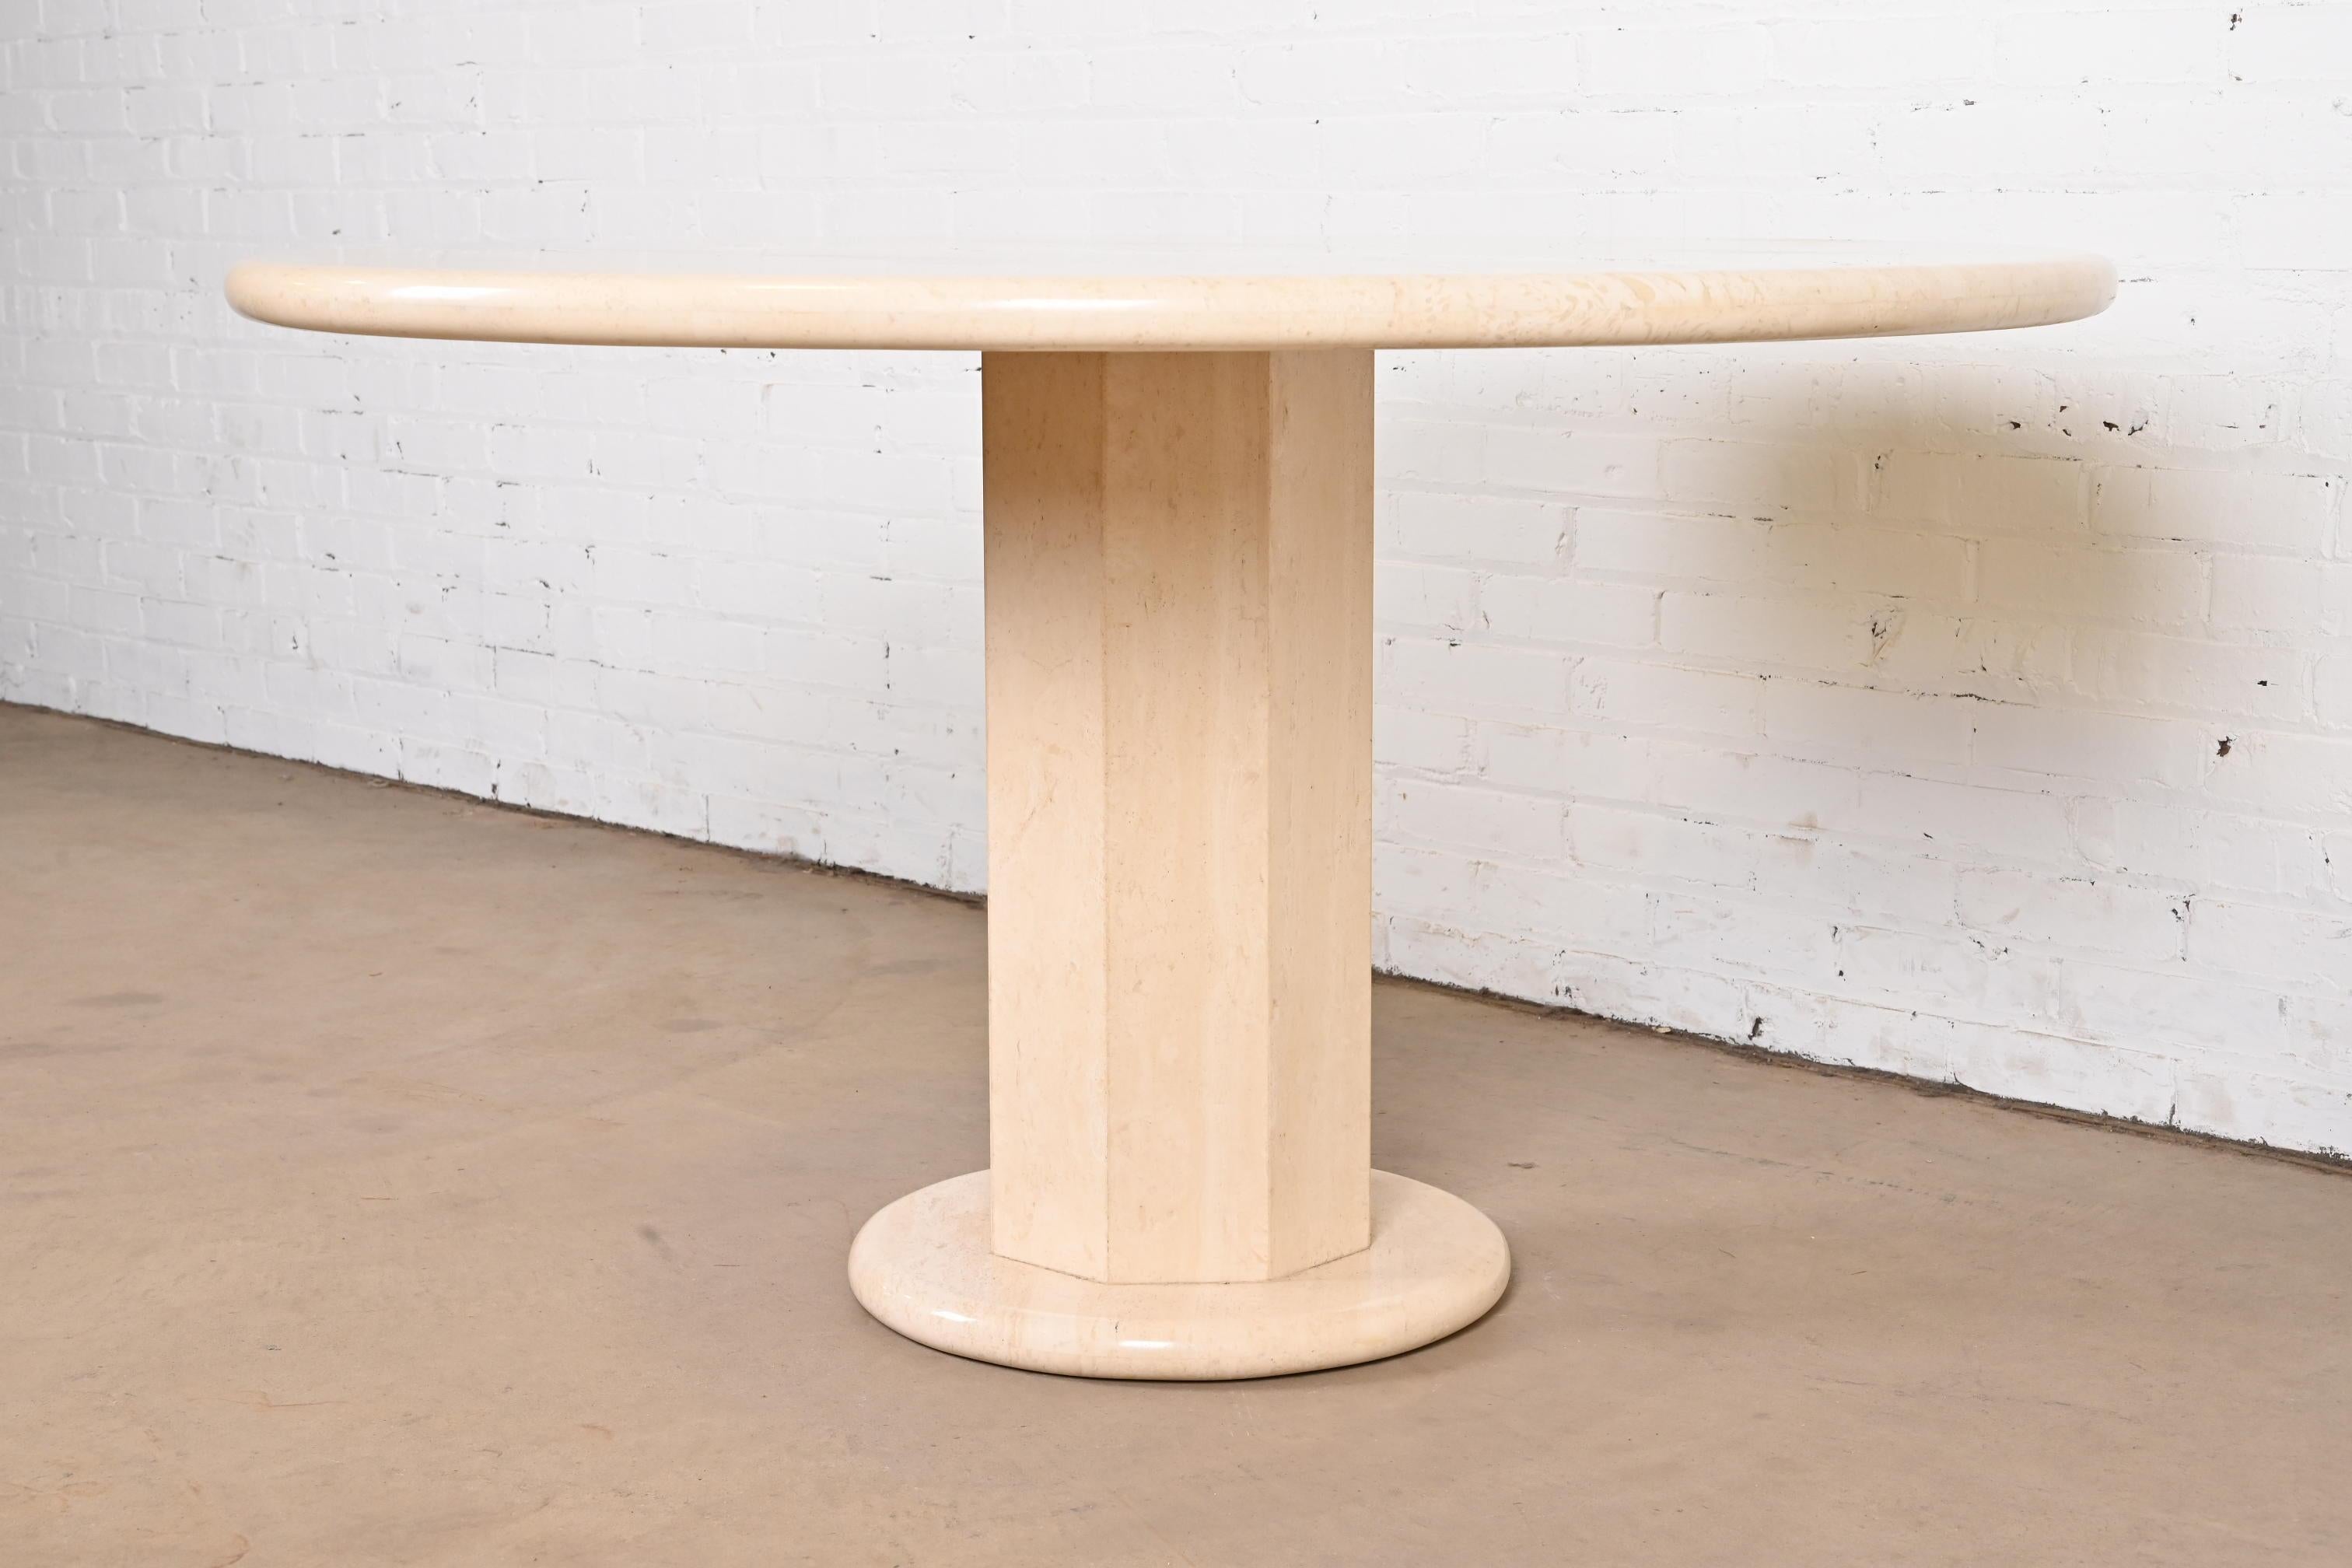 Late 20th Century Modern Italian Travertine Round Pedestal Dining or Center Table by Ello, 1970s For Sale